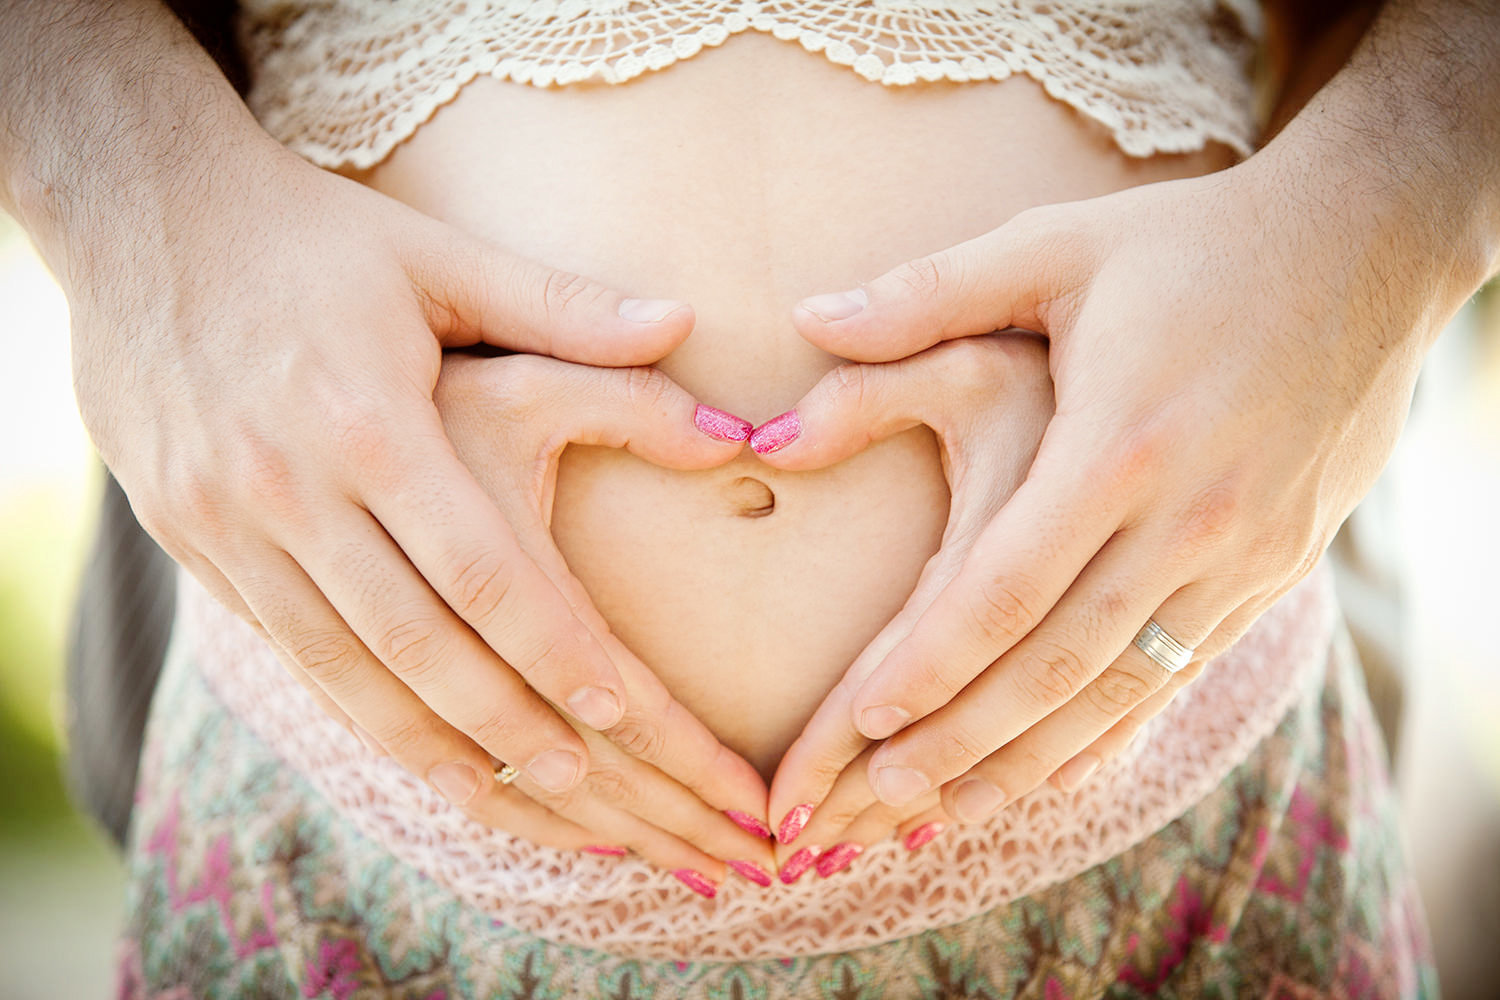 Hands making a heart around pregnant belly during this Maternity Session.